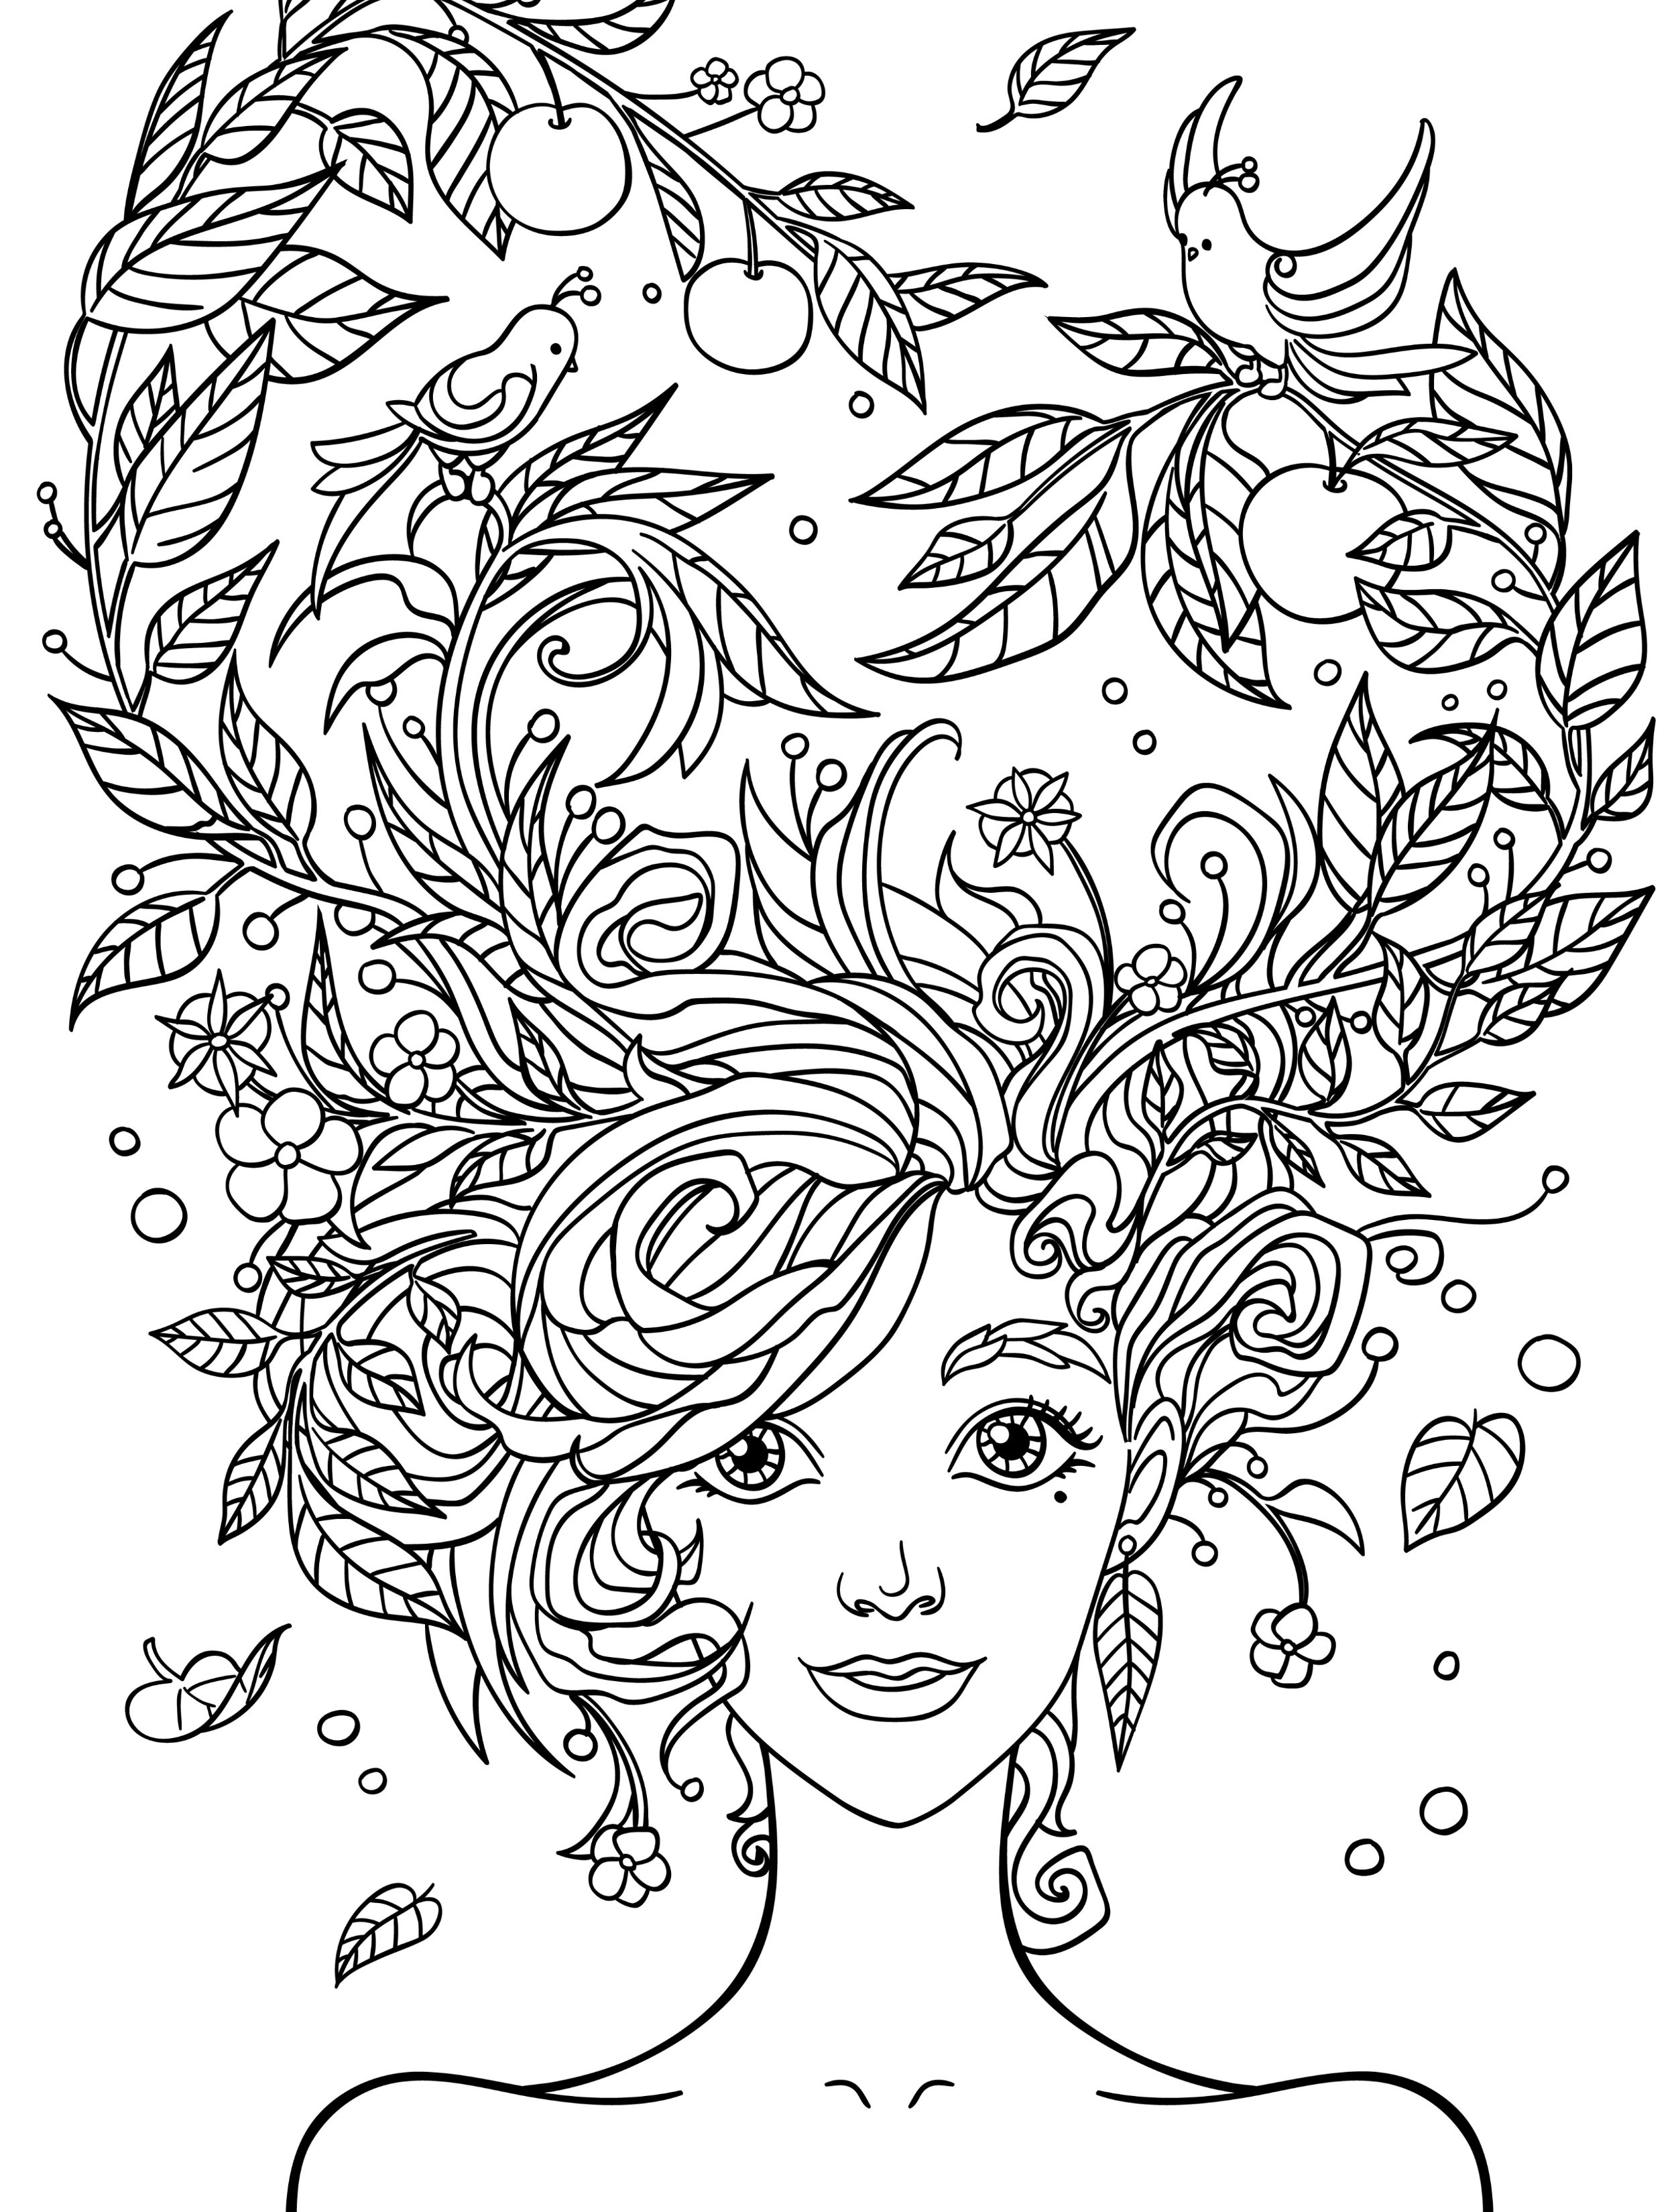 Coloring Pages For Adults Boys
 10 Crazy Hair Adult Coloring Pages Page 5 of 12 Nerdy